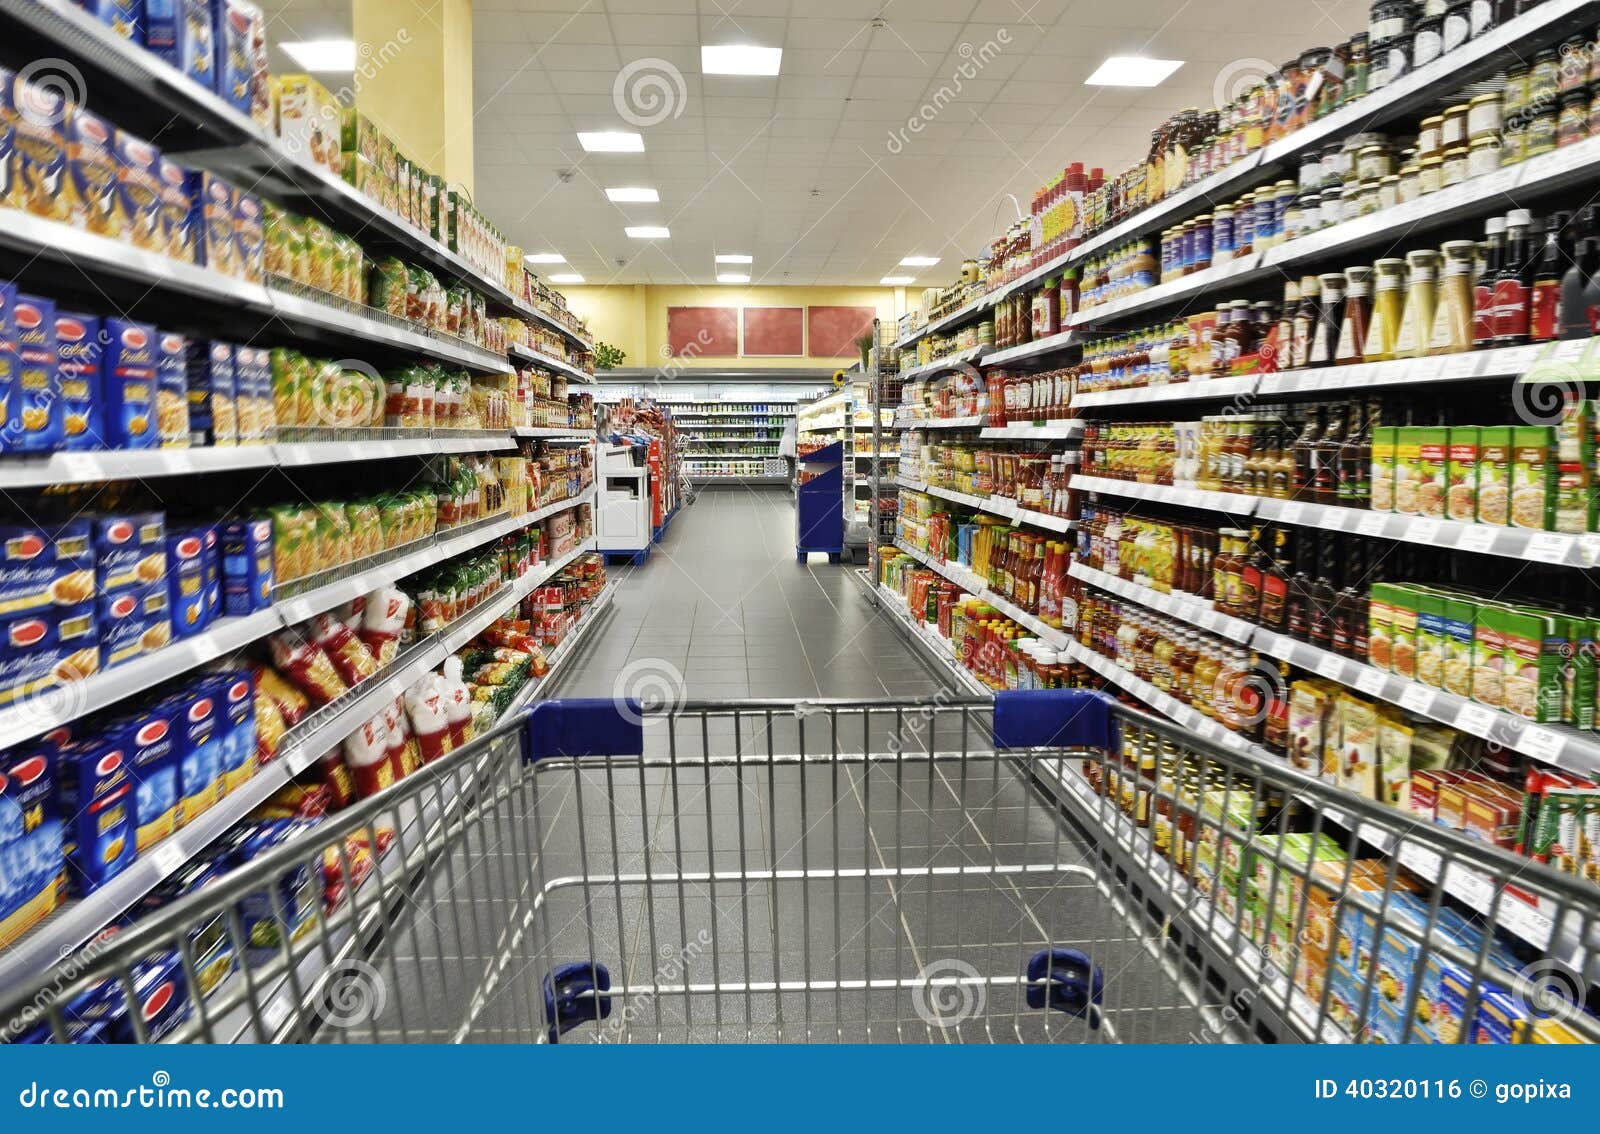 shopping cart in a supermarket